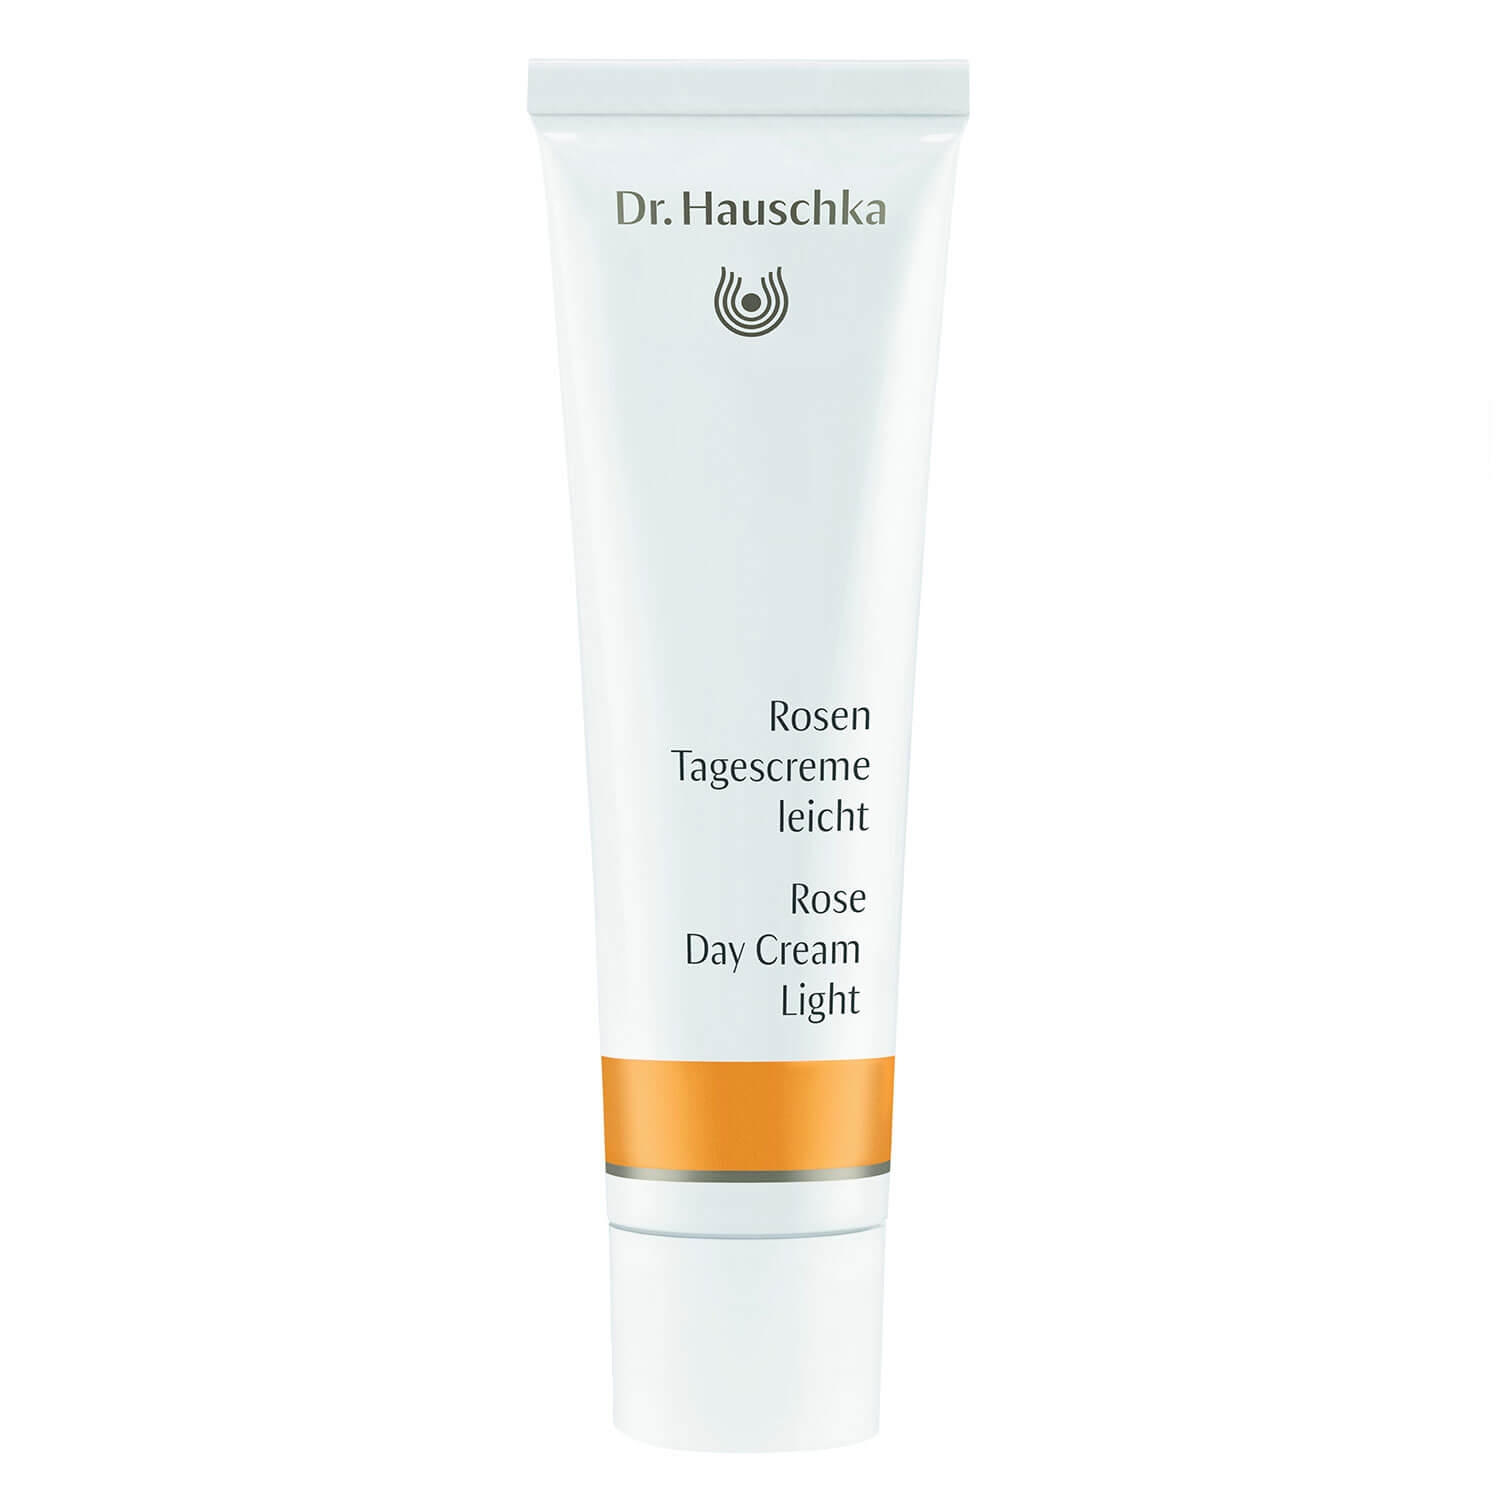 Product image from Dr. Hauschka - Rosen Tagescreme leicht